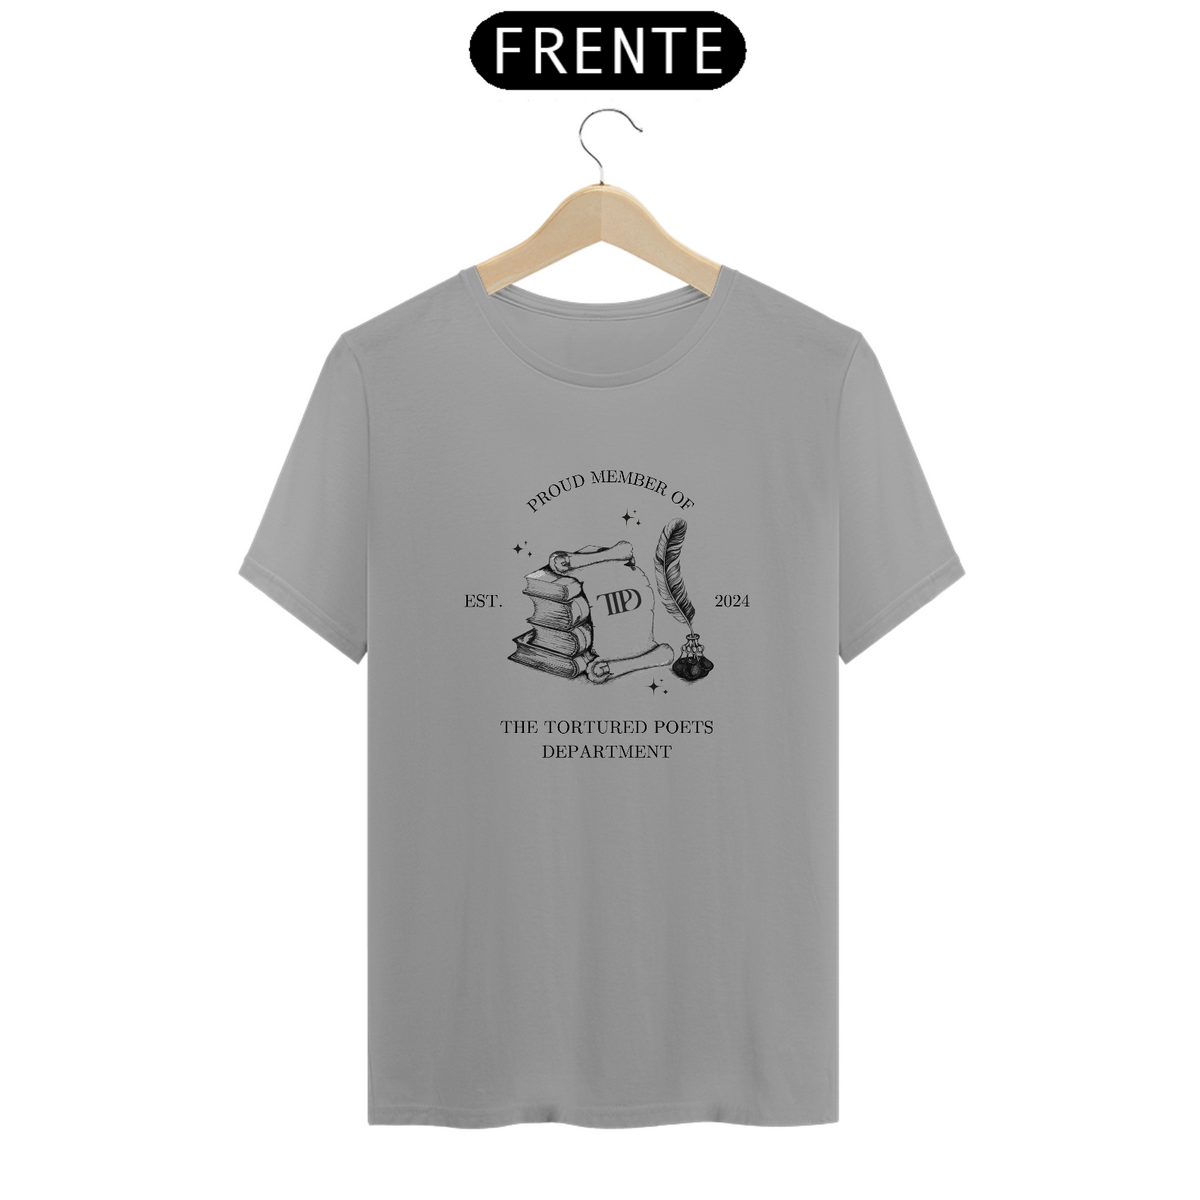 Nome do produto: Camiseta proud member of The Tortured Poets Department - Taylor Swift